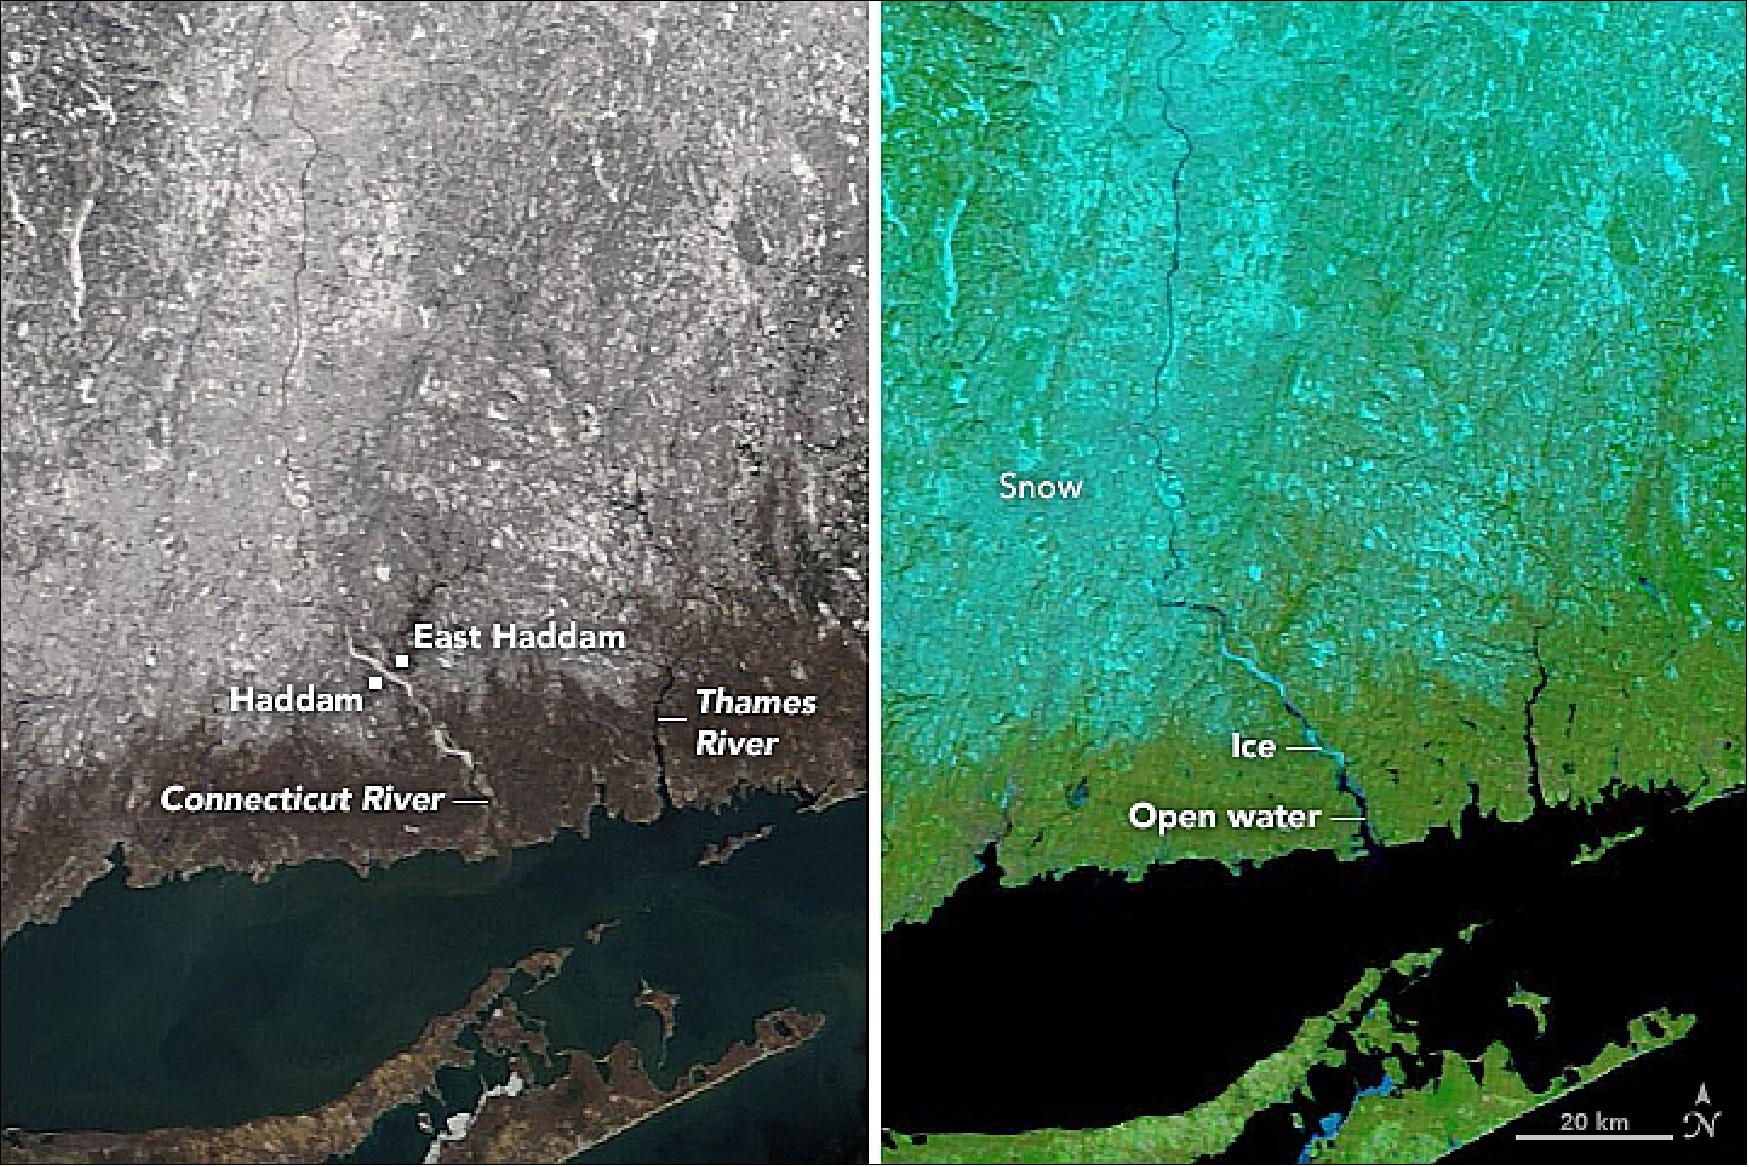 Figure 38: MODIS images of the Connecticut region acquired on 18 January 2018 (image credit: NASA Earth Observatory image by Joshua Stevens, using MODIS data from LANCE/EOSDIS Rapid Response, caption by Adam Voiland)